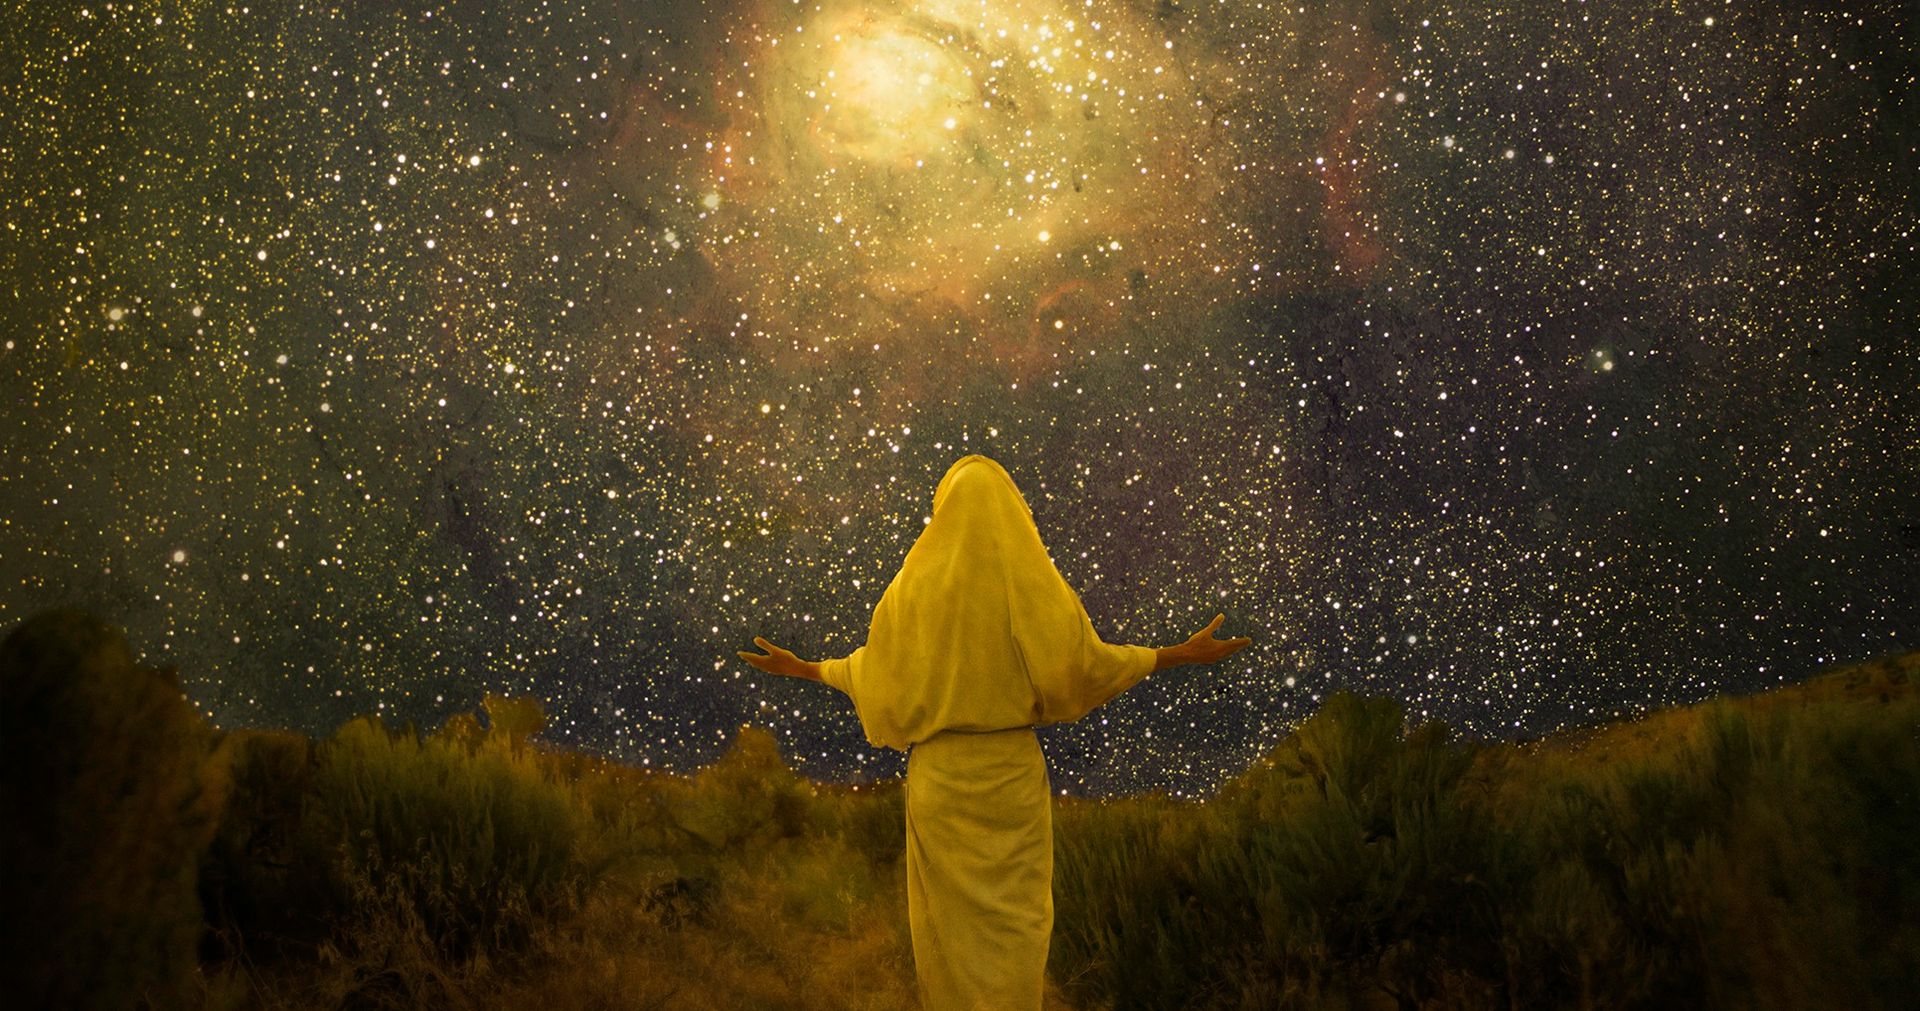 Photographic illustration of the premortal Jesus Christ (seen from the back) wearing a white robe.   He has His arms extended as he looks at a darkened expanse of space filled with stars.